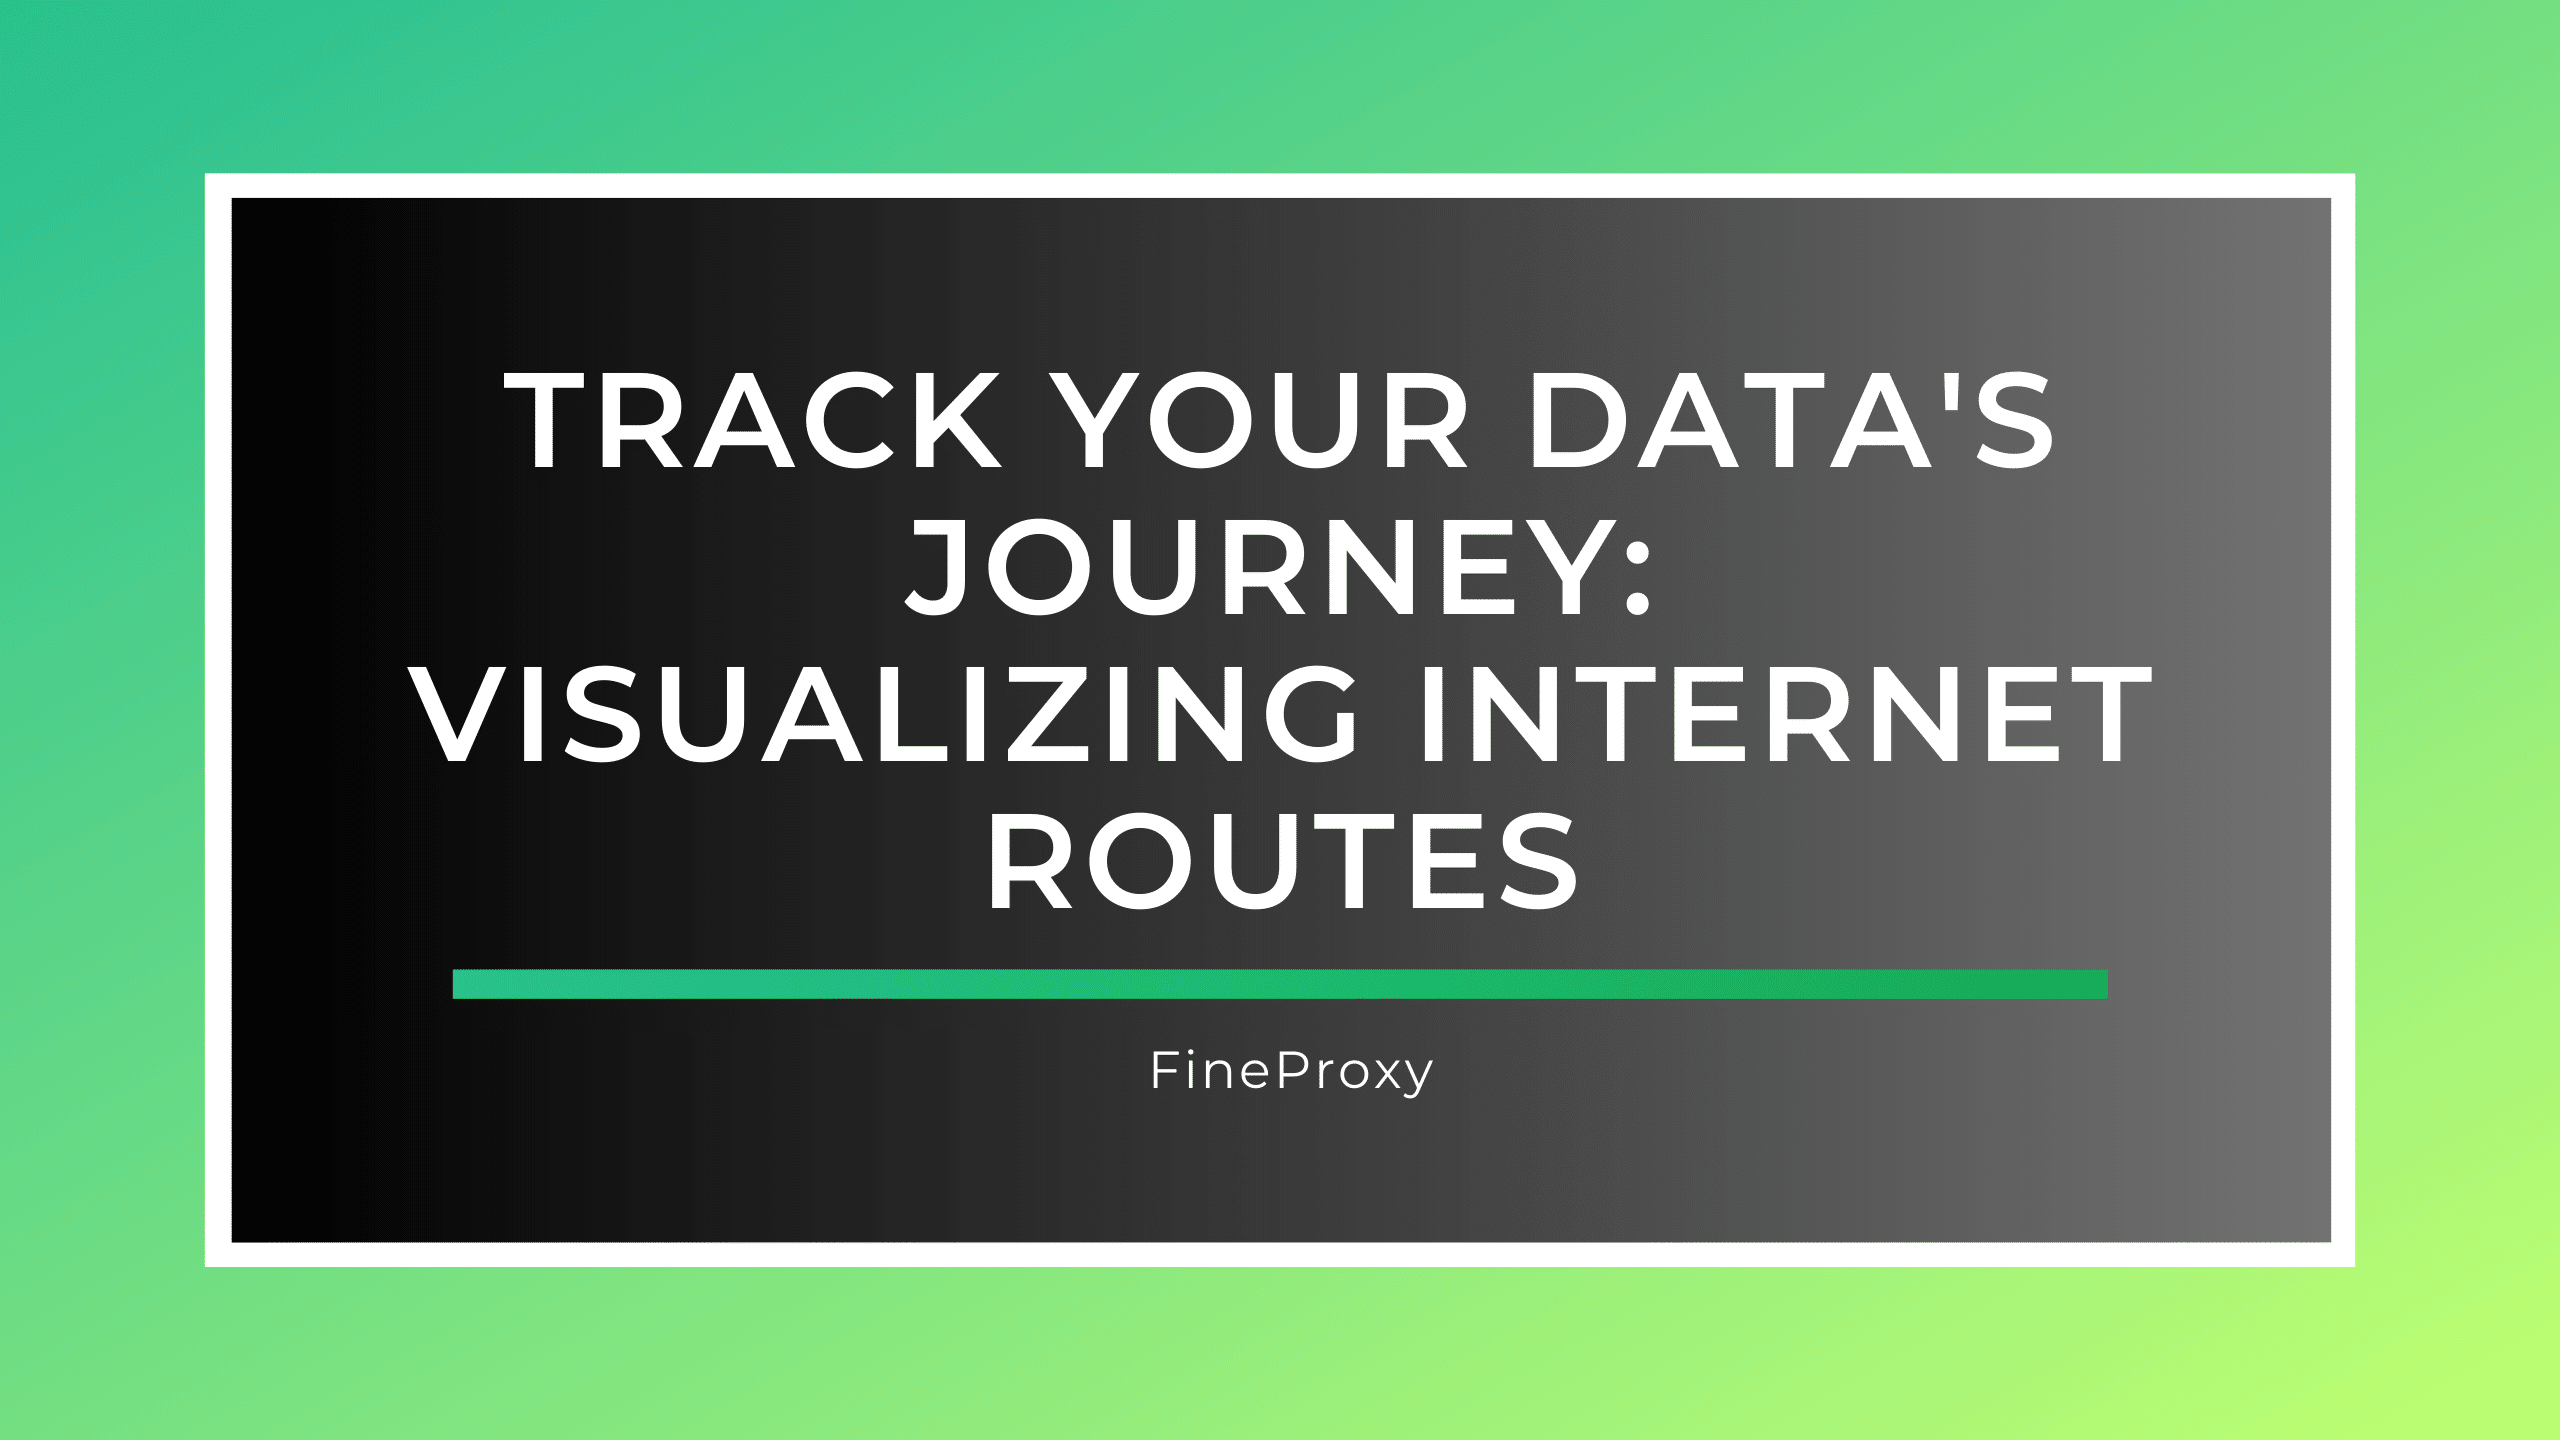 Track Your Data’s Journey: Visualizing Internet Routes